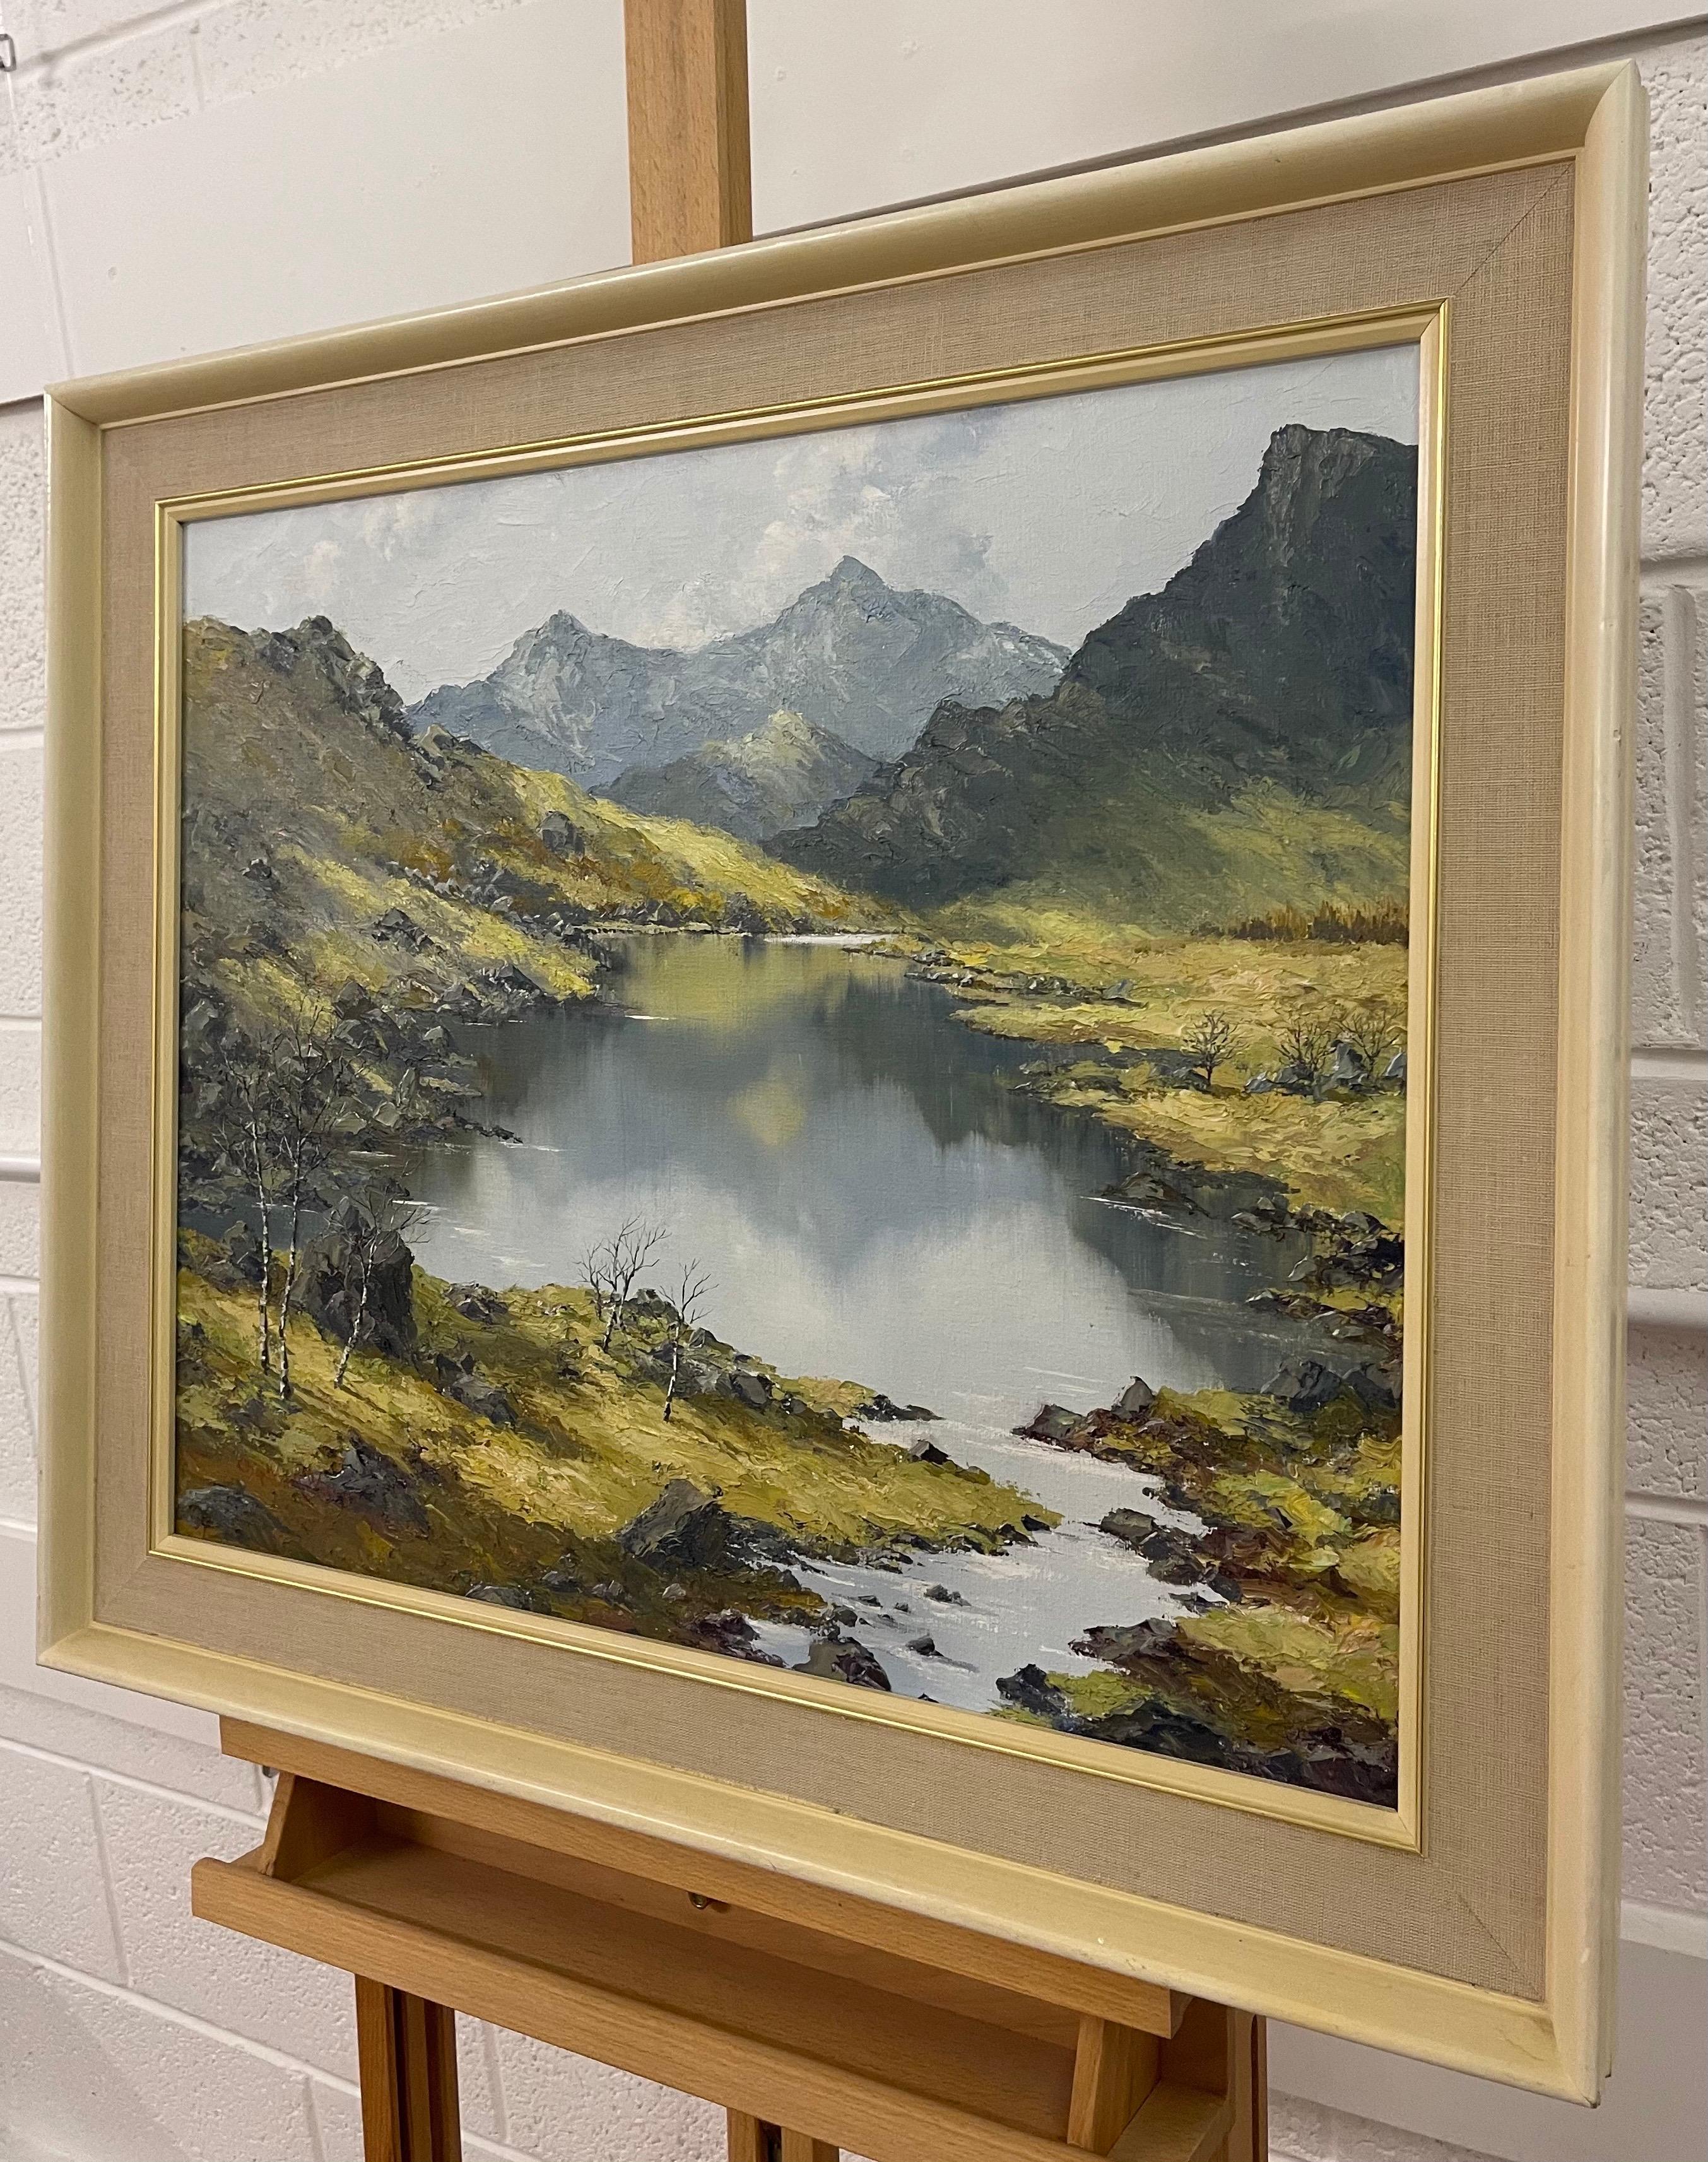 Welsh Landscape with Mountains & Lake Impasto Oil Painting by British Artist - Impressionist Mixed Media Art by Charles Wyatt Warren